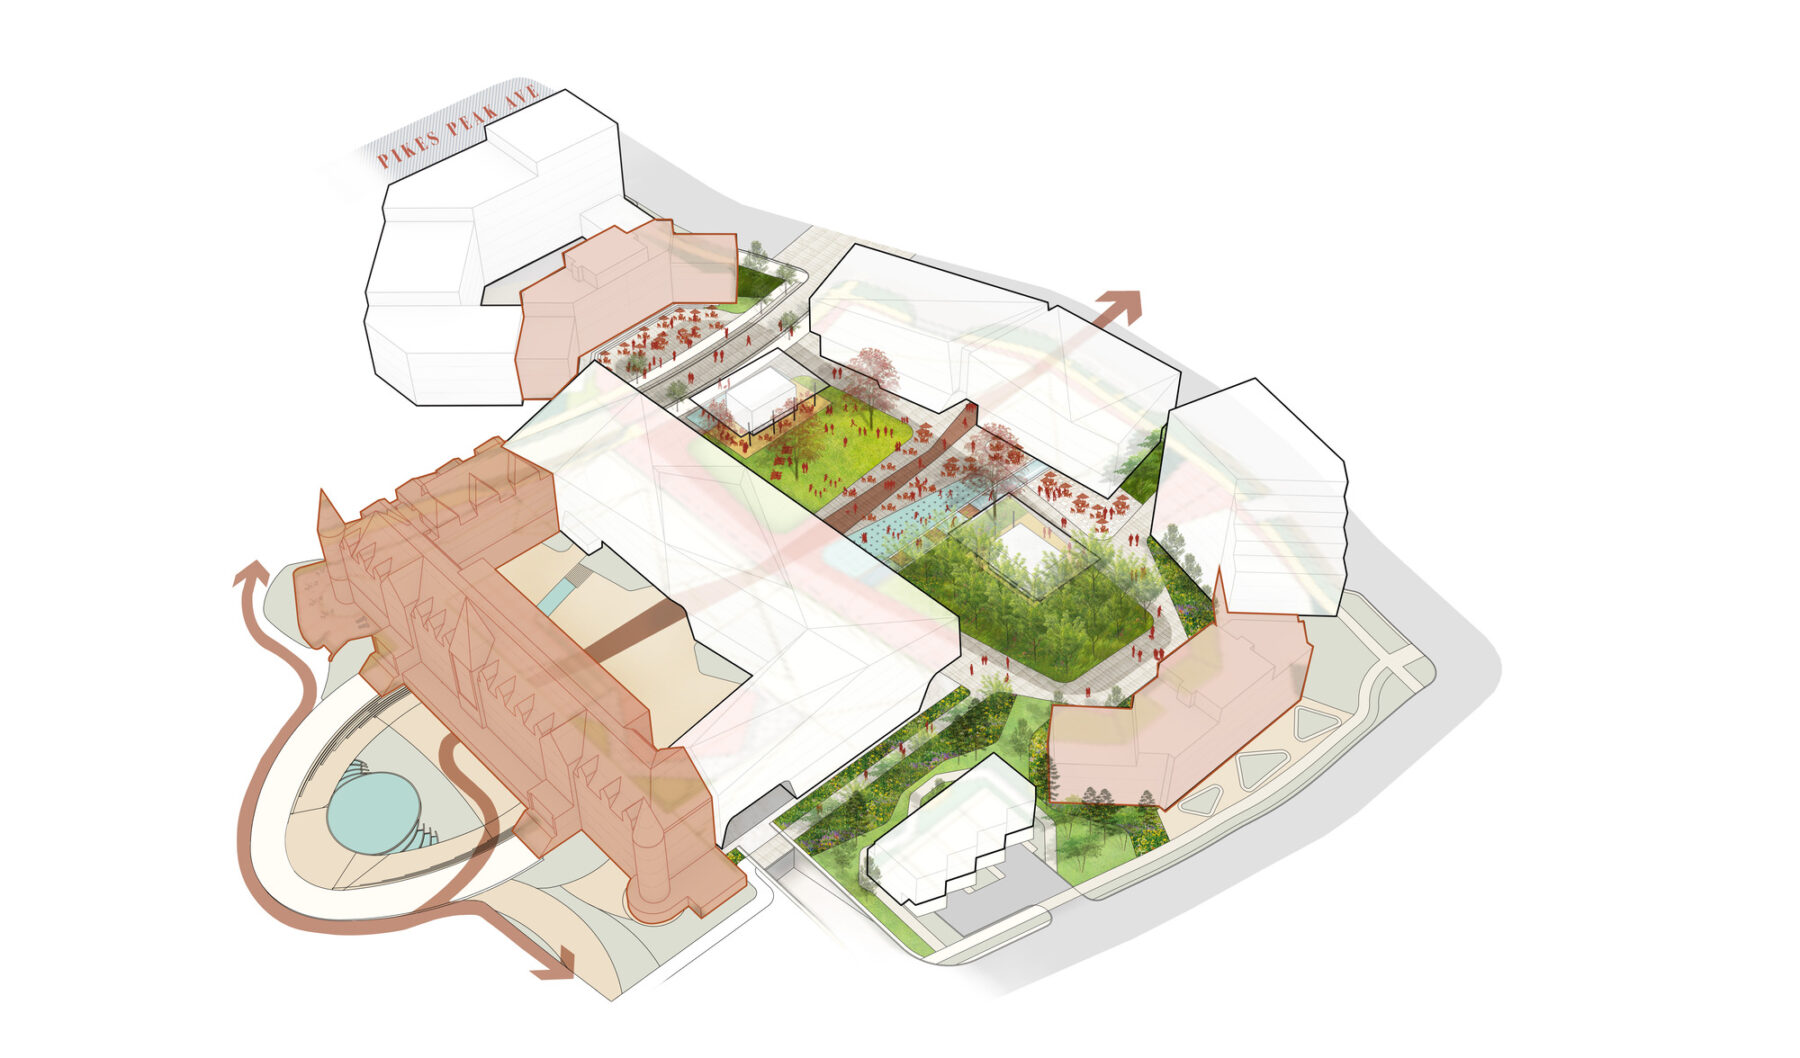 Diagram showing the castle building with additional building massing adjoined, an interior courtyard space and directional lines to the quad.